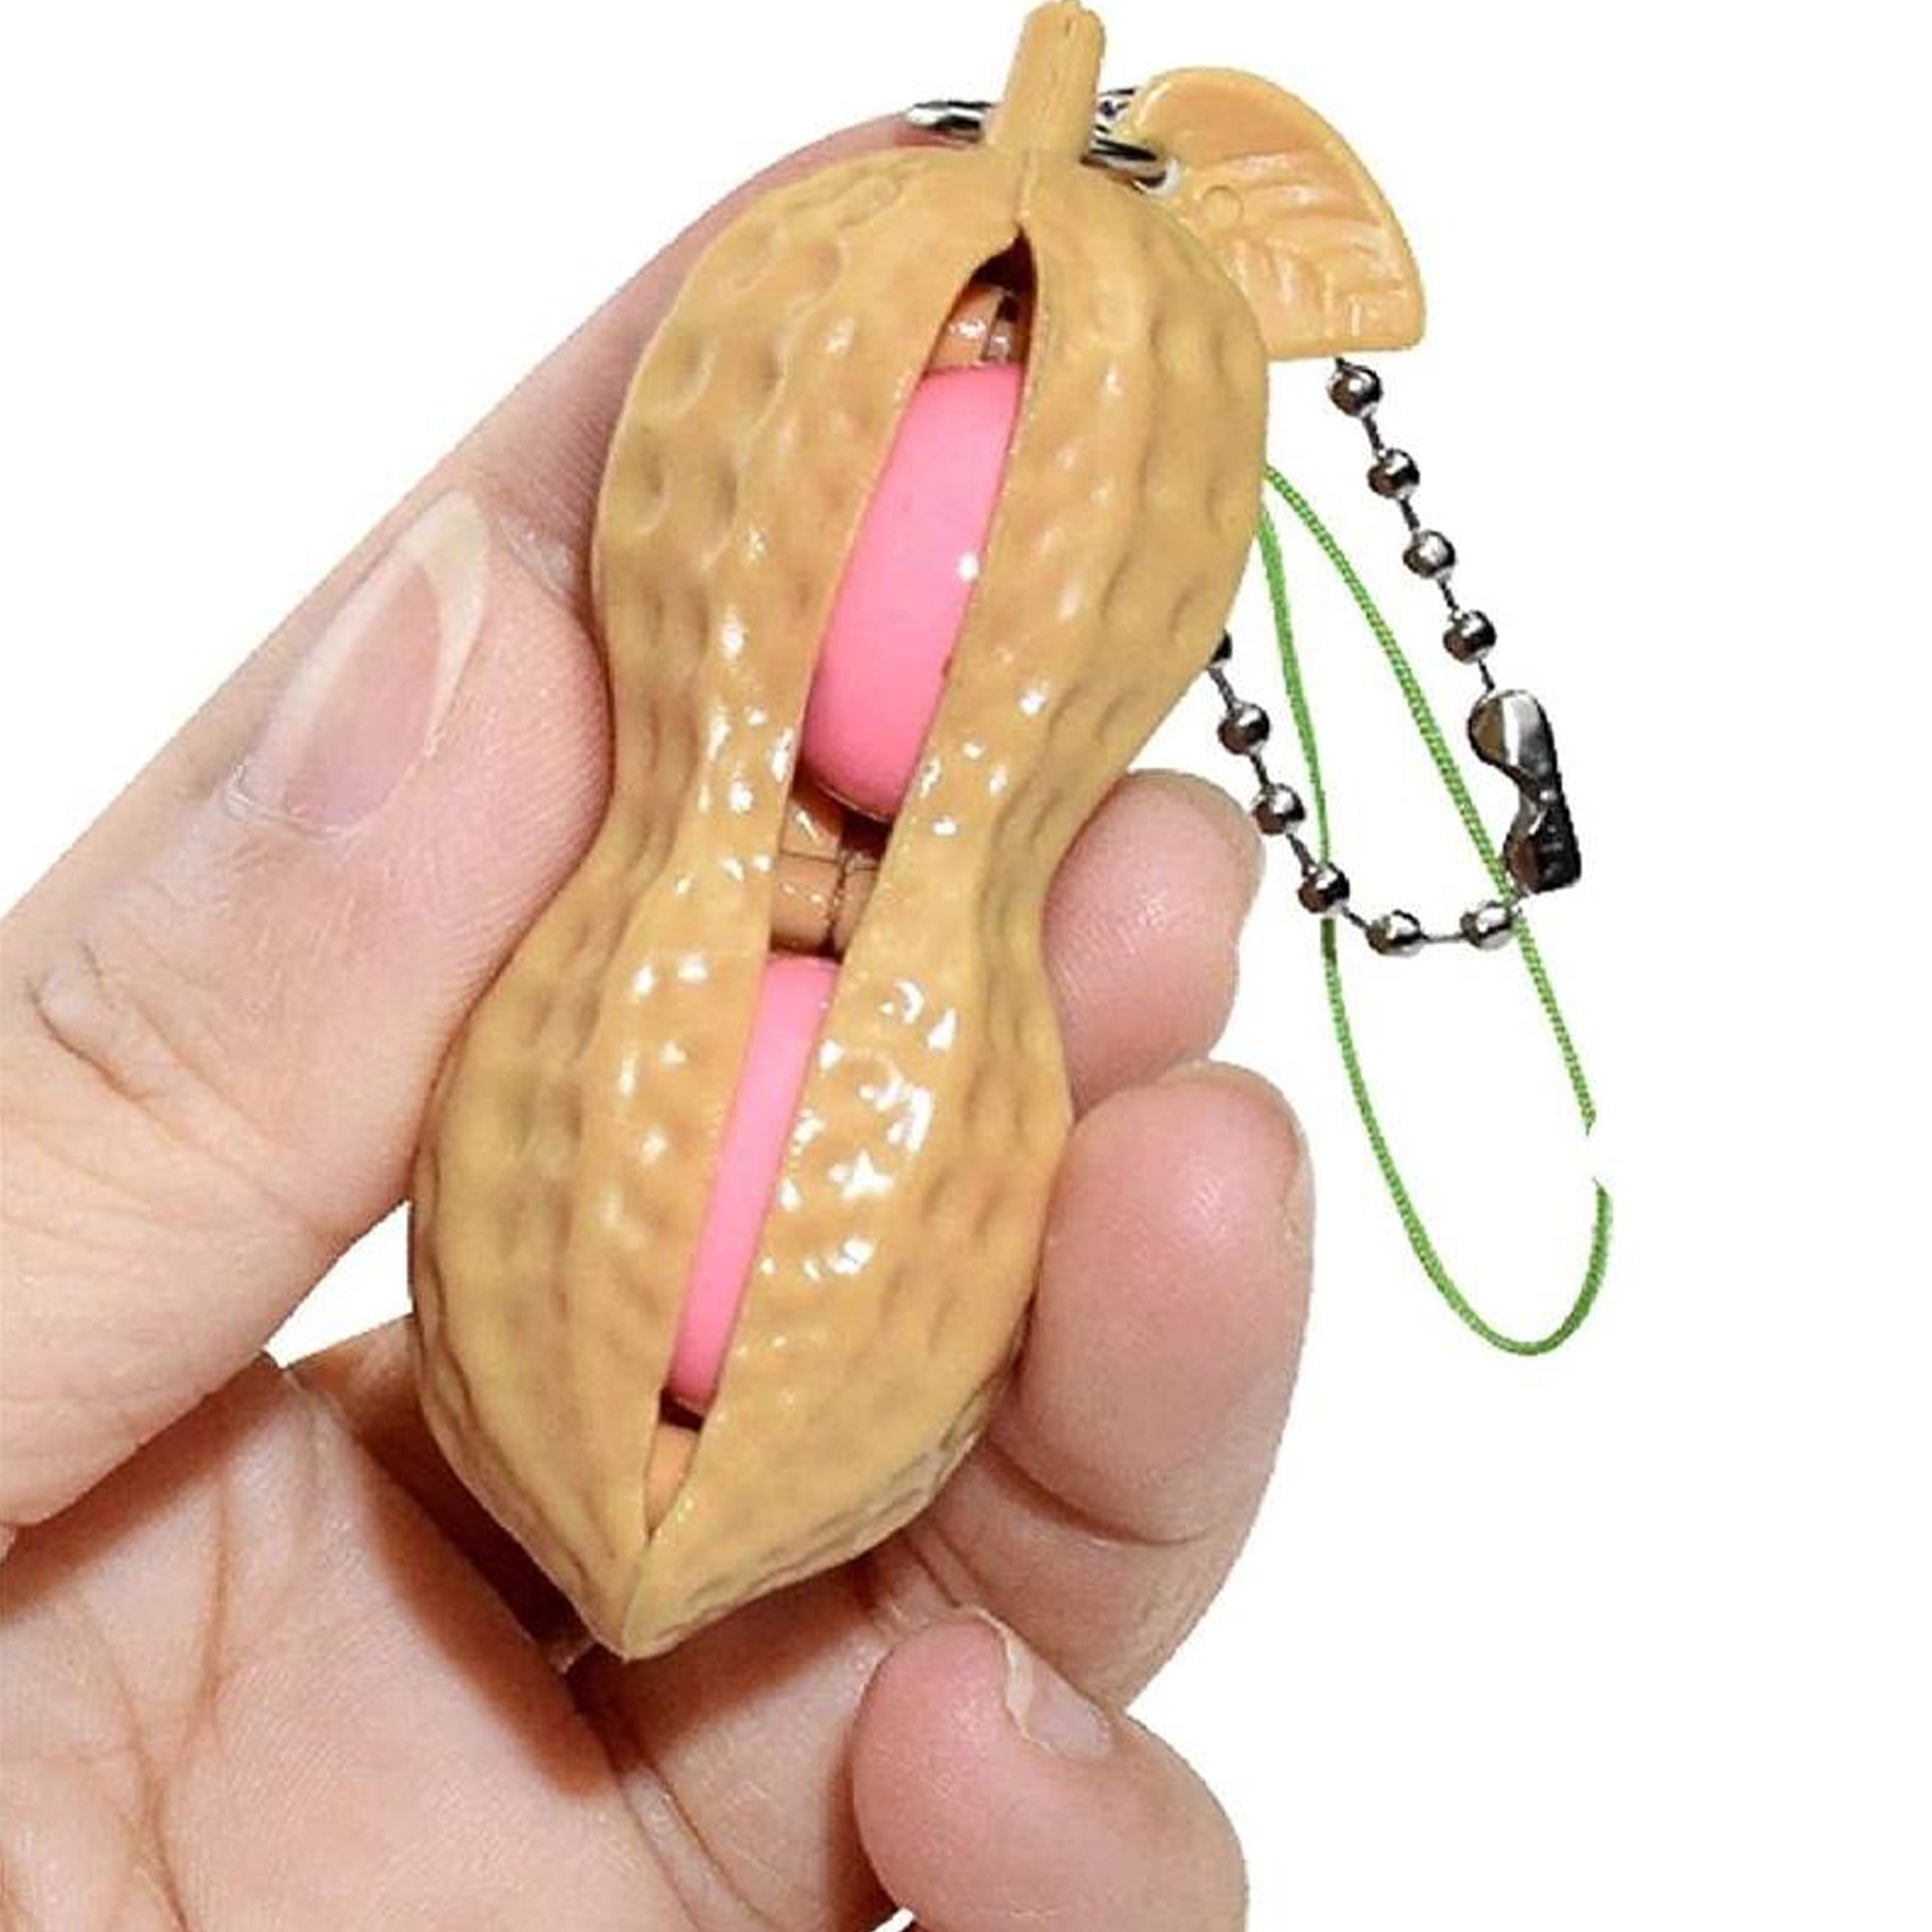 Squeeze Beans Keychain Stress Relieving Sensory Peanuts Fidget Toy